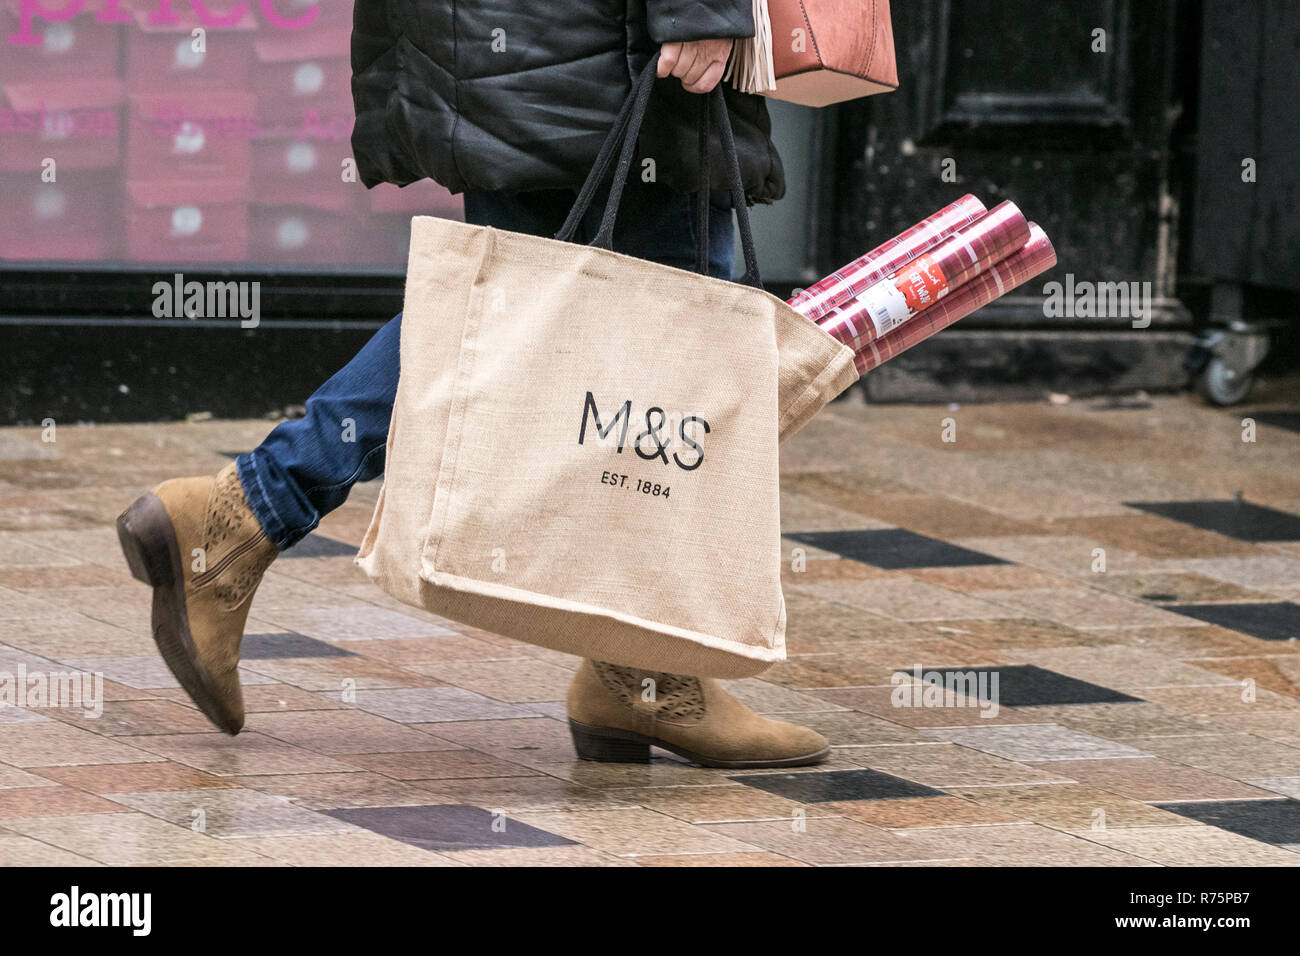 Marks and Spencer shopping bag M&S Christmas Shopping.  Christmas shopping on the high streets of Blackpool in Lancashire.  With just over two weeks remaining till the festive period begins, savvy shoppers fill their bags with the latest must haves for family and friends. Stock Photo